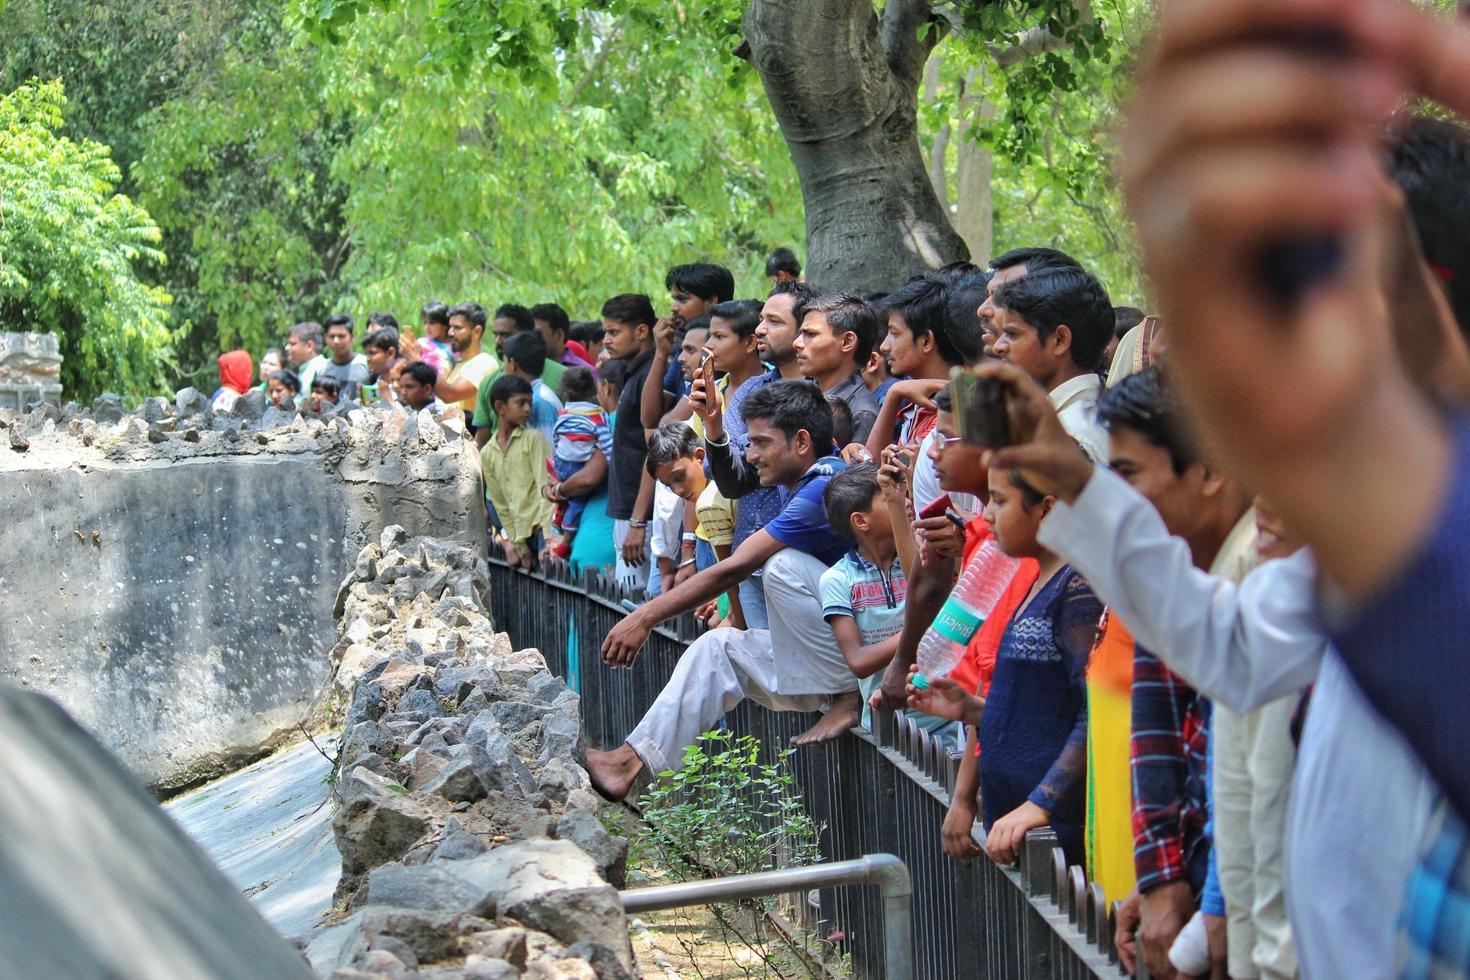 Tourists are watching animals in Delhi Zoo photo